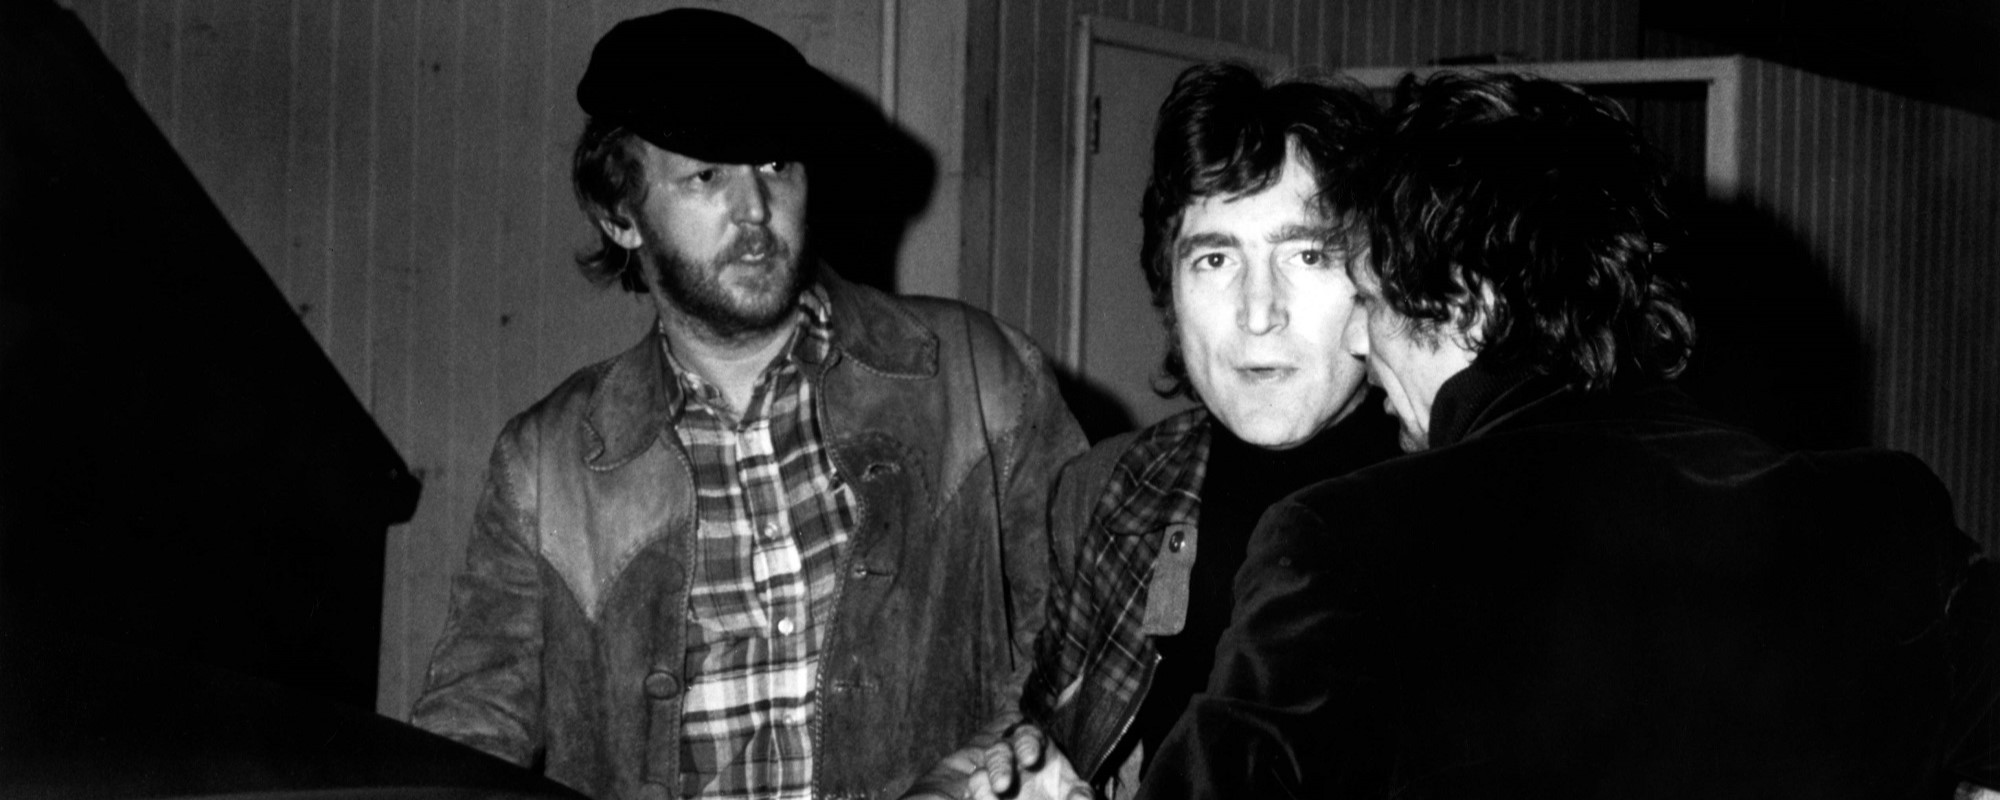 Remember When a Drunk John Lennon and Harry Nilsson Were Kicked Out of an L.A. Club for Heckling the Smothers Brothers